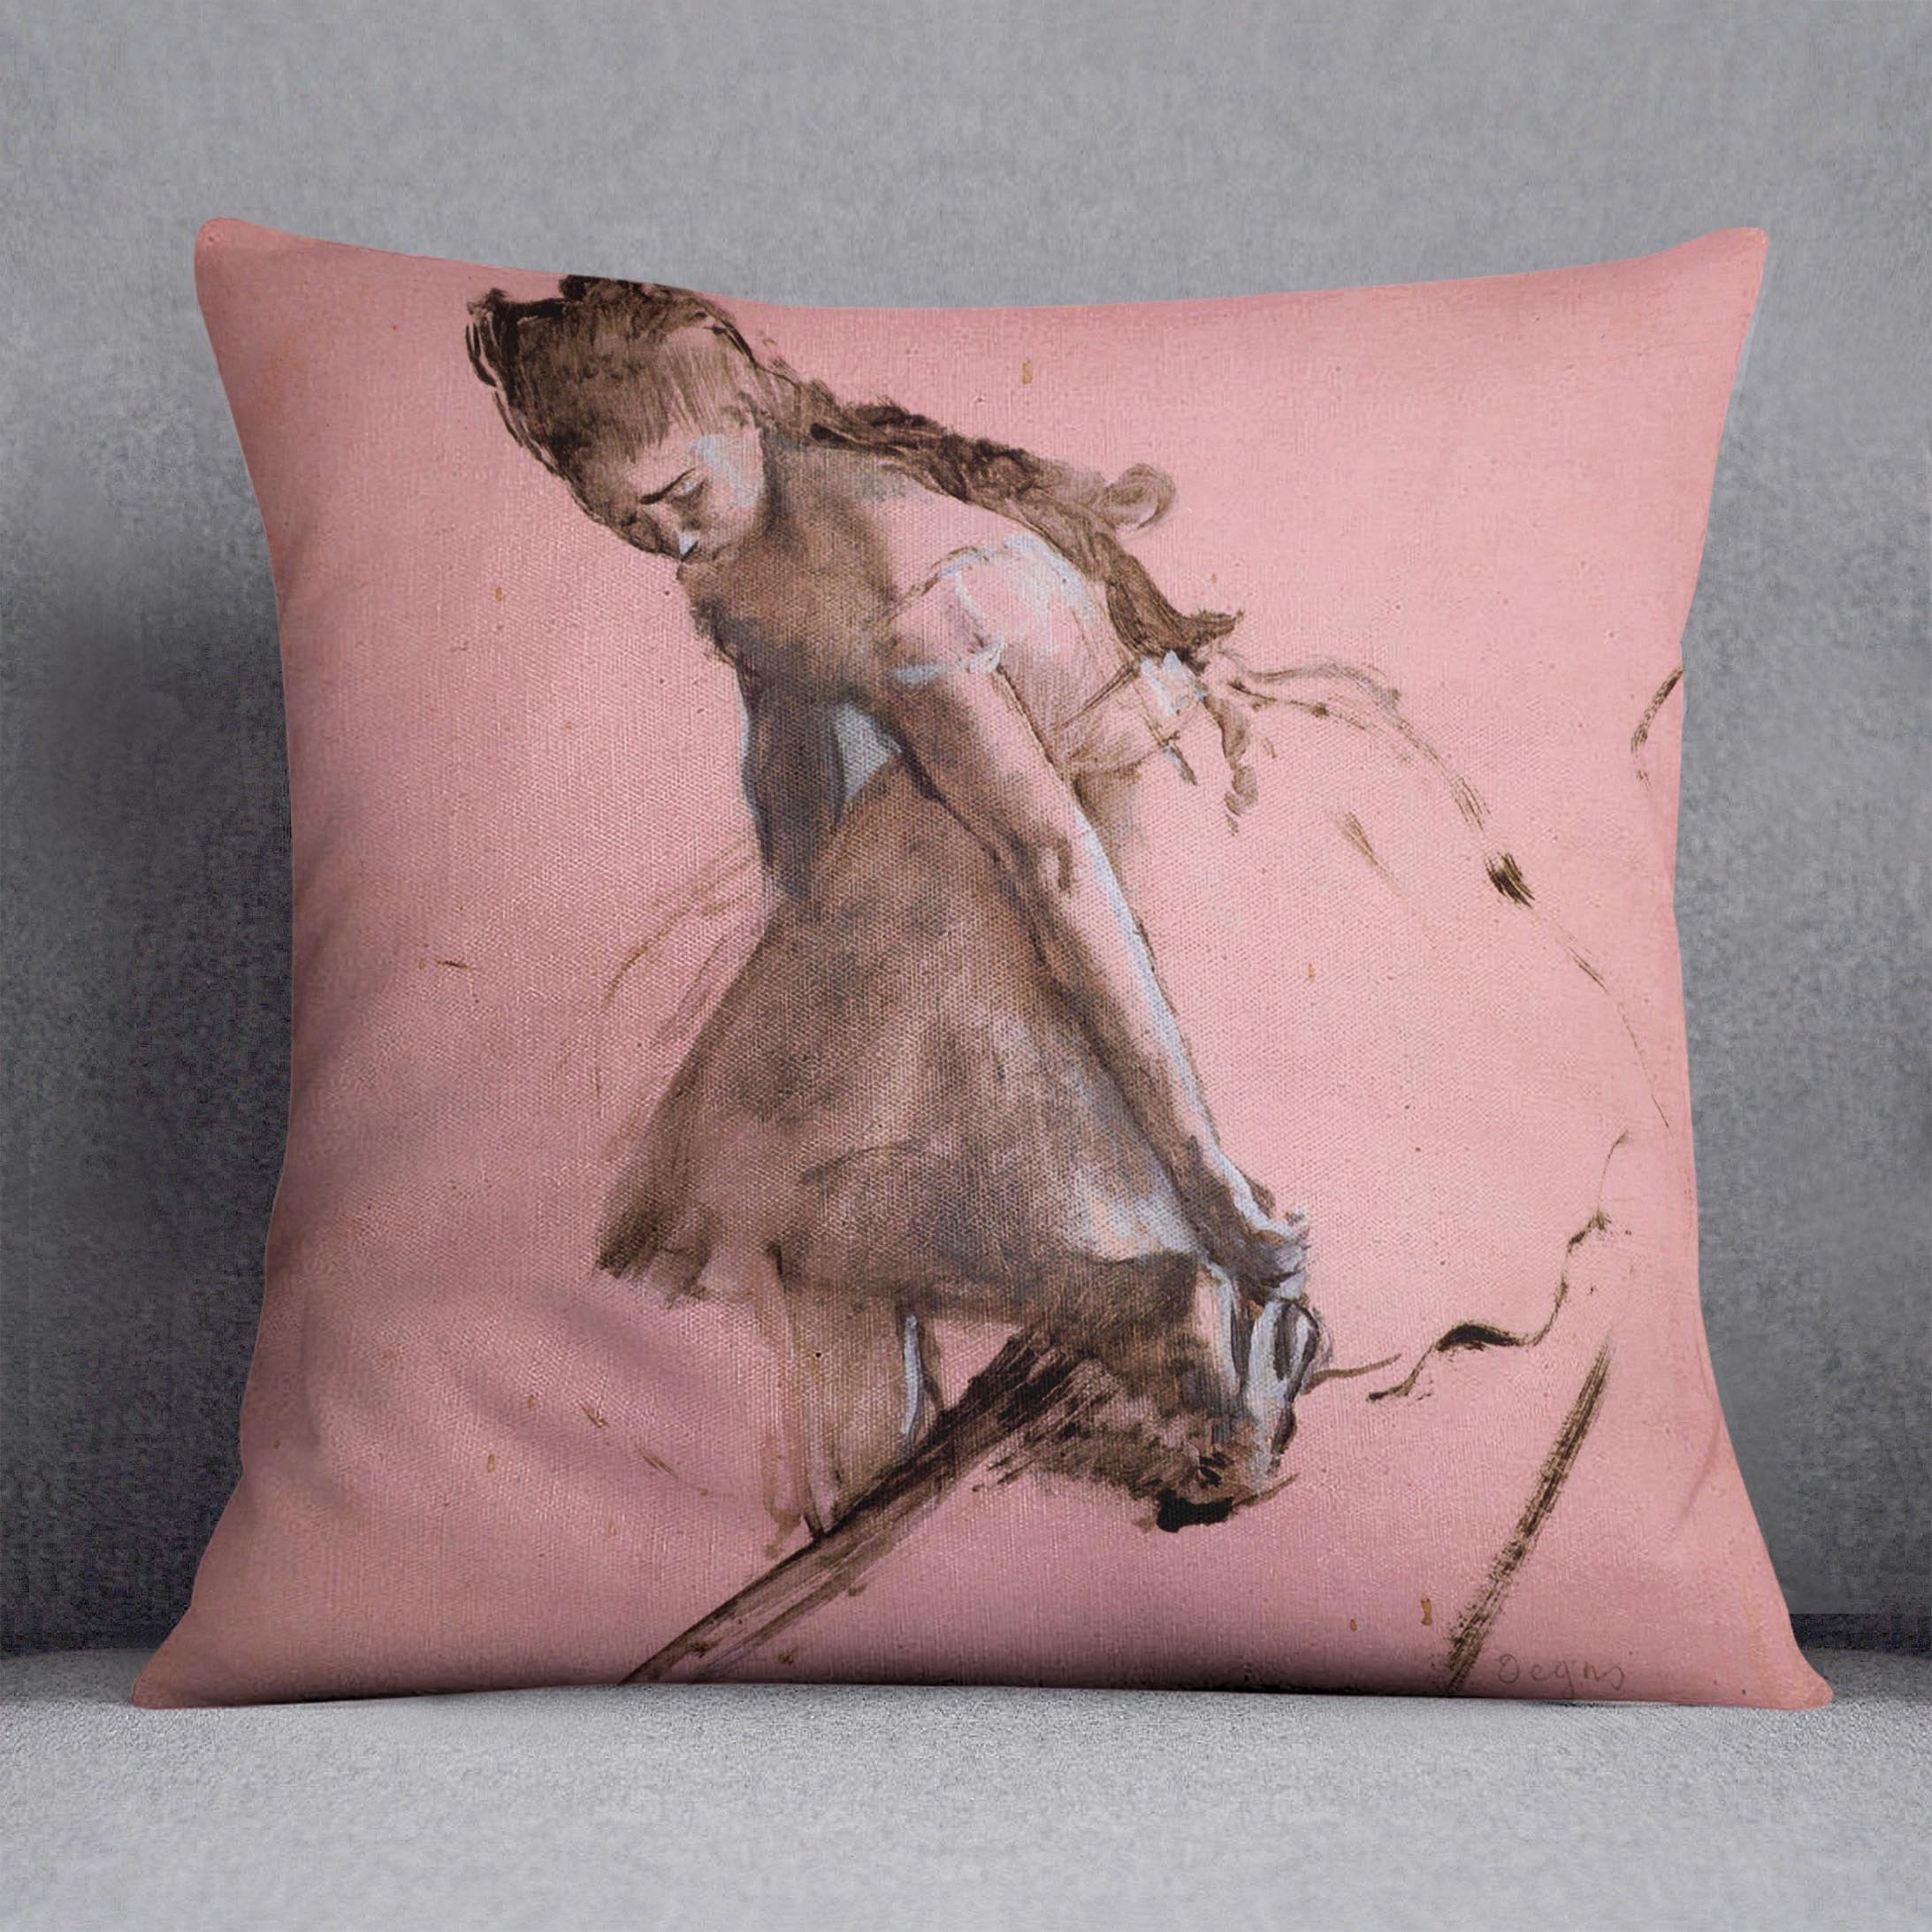 Dancer slipping on her shoe by Degas Cushion